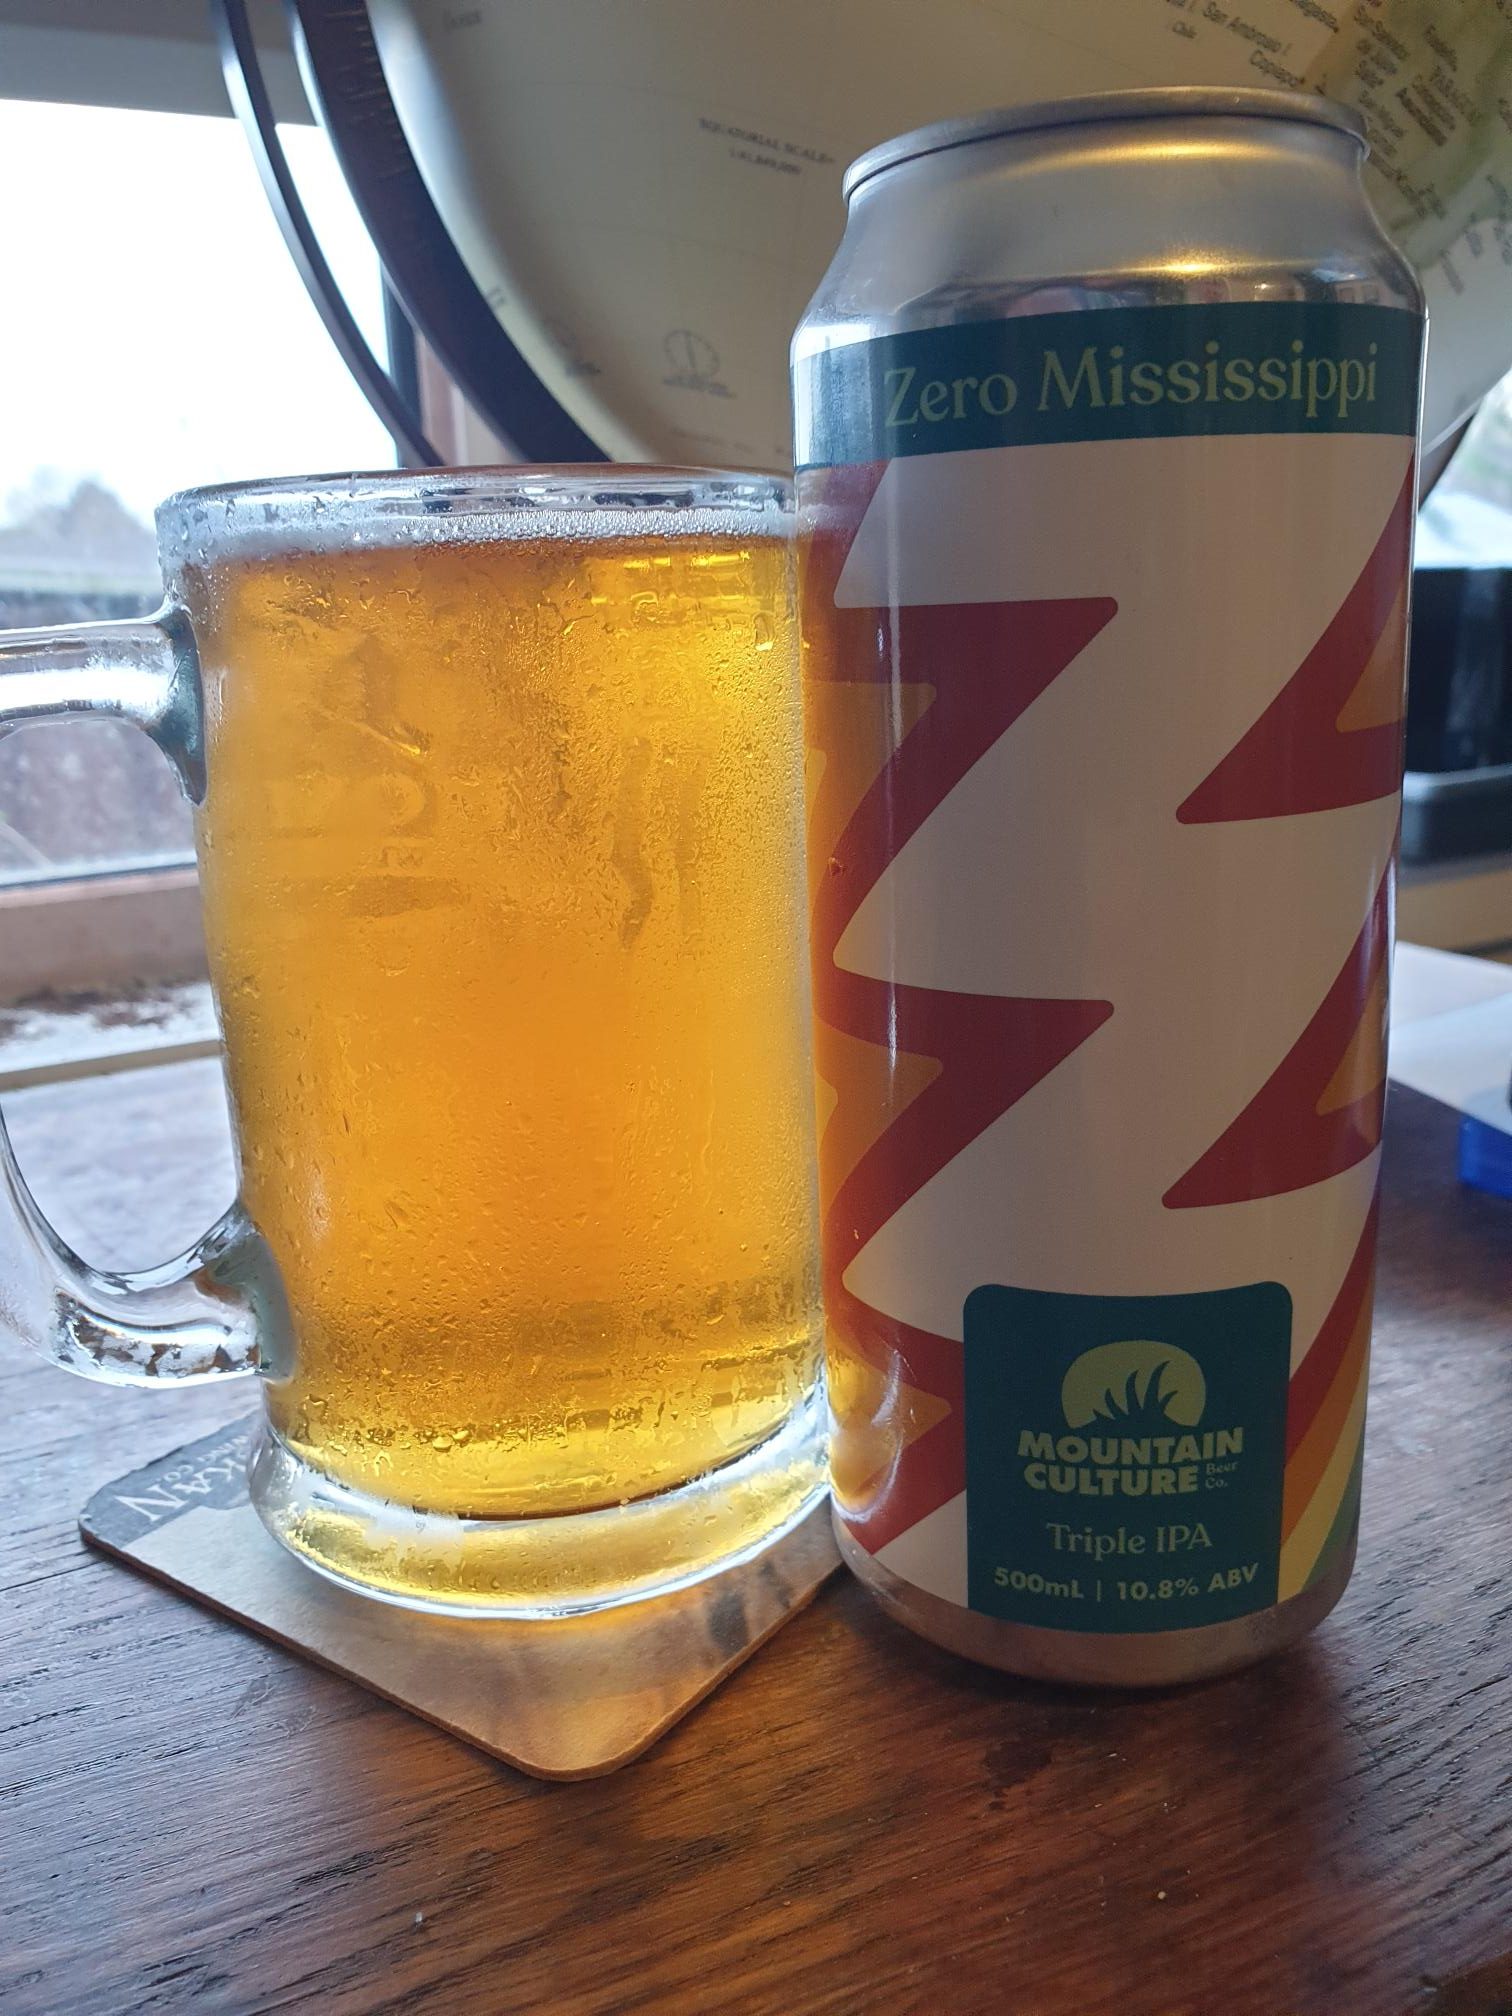 Zero Mississippi Triple IPA by Mountain Culture